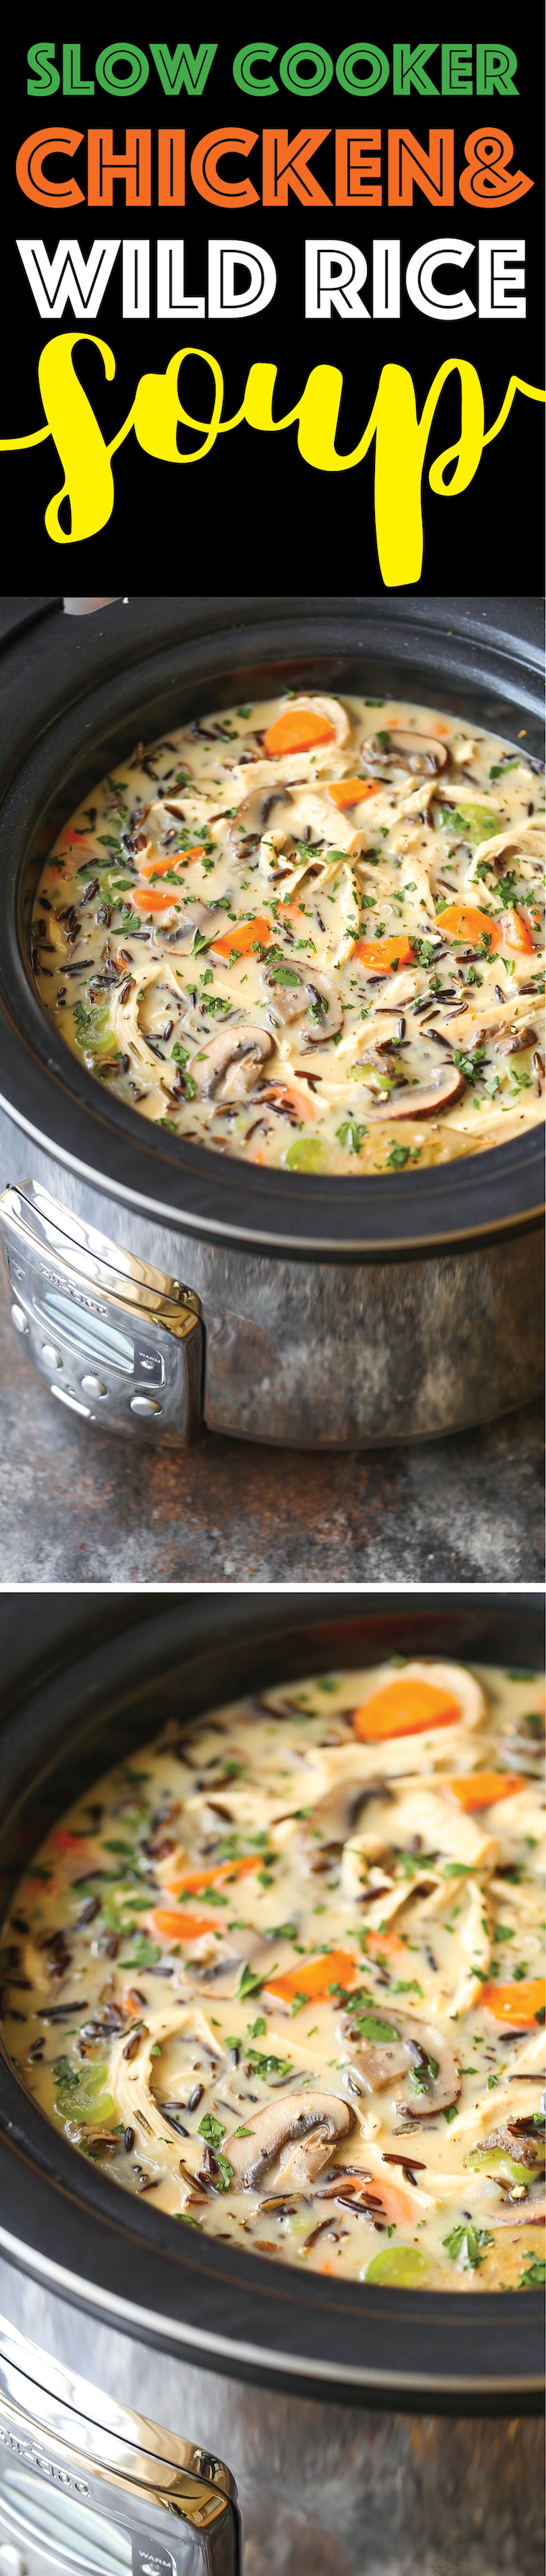 Slow Cooker Chicken and Wild Rice Soup - Pure creamy comfort food made right in your crockpot! So quick, easy, and hearty with veggies, rice and chicken!